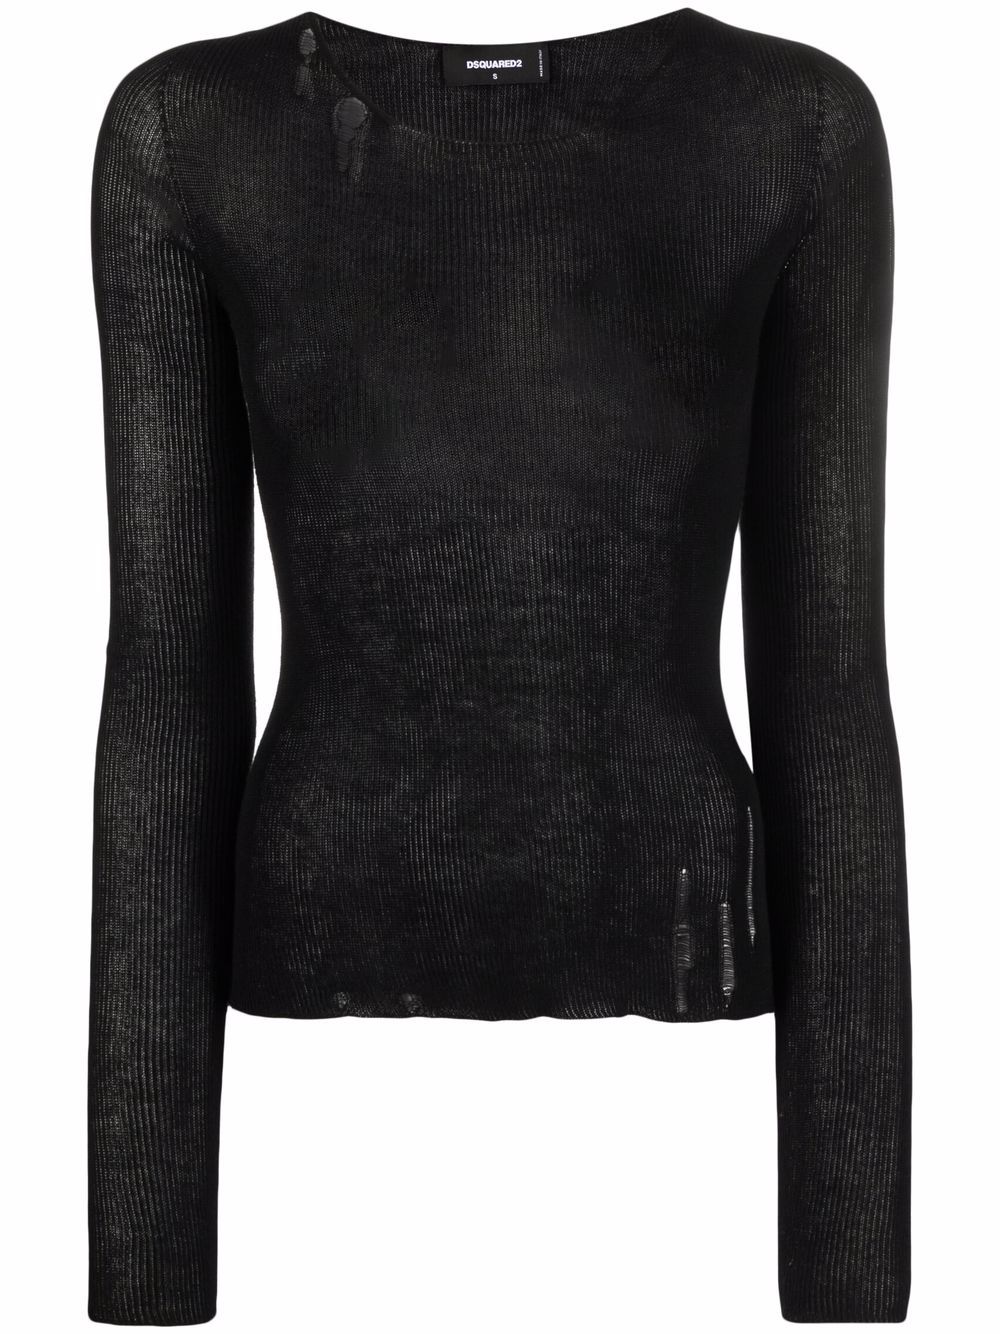 Dsquared2 Distressed Knitted Sweater - Farfetch